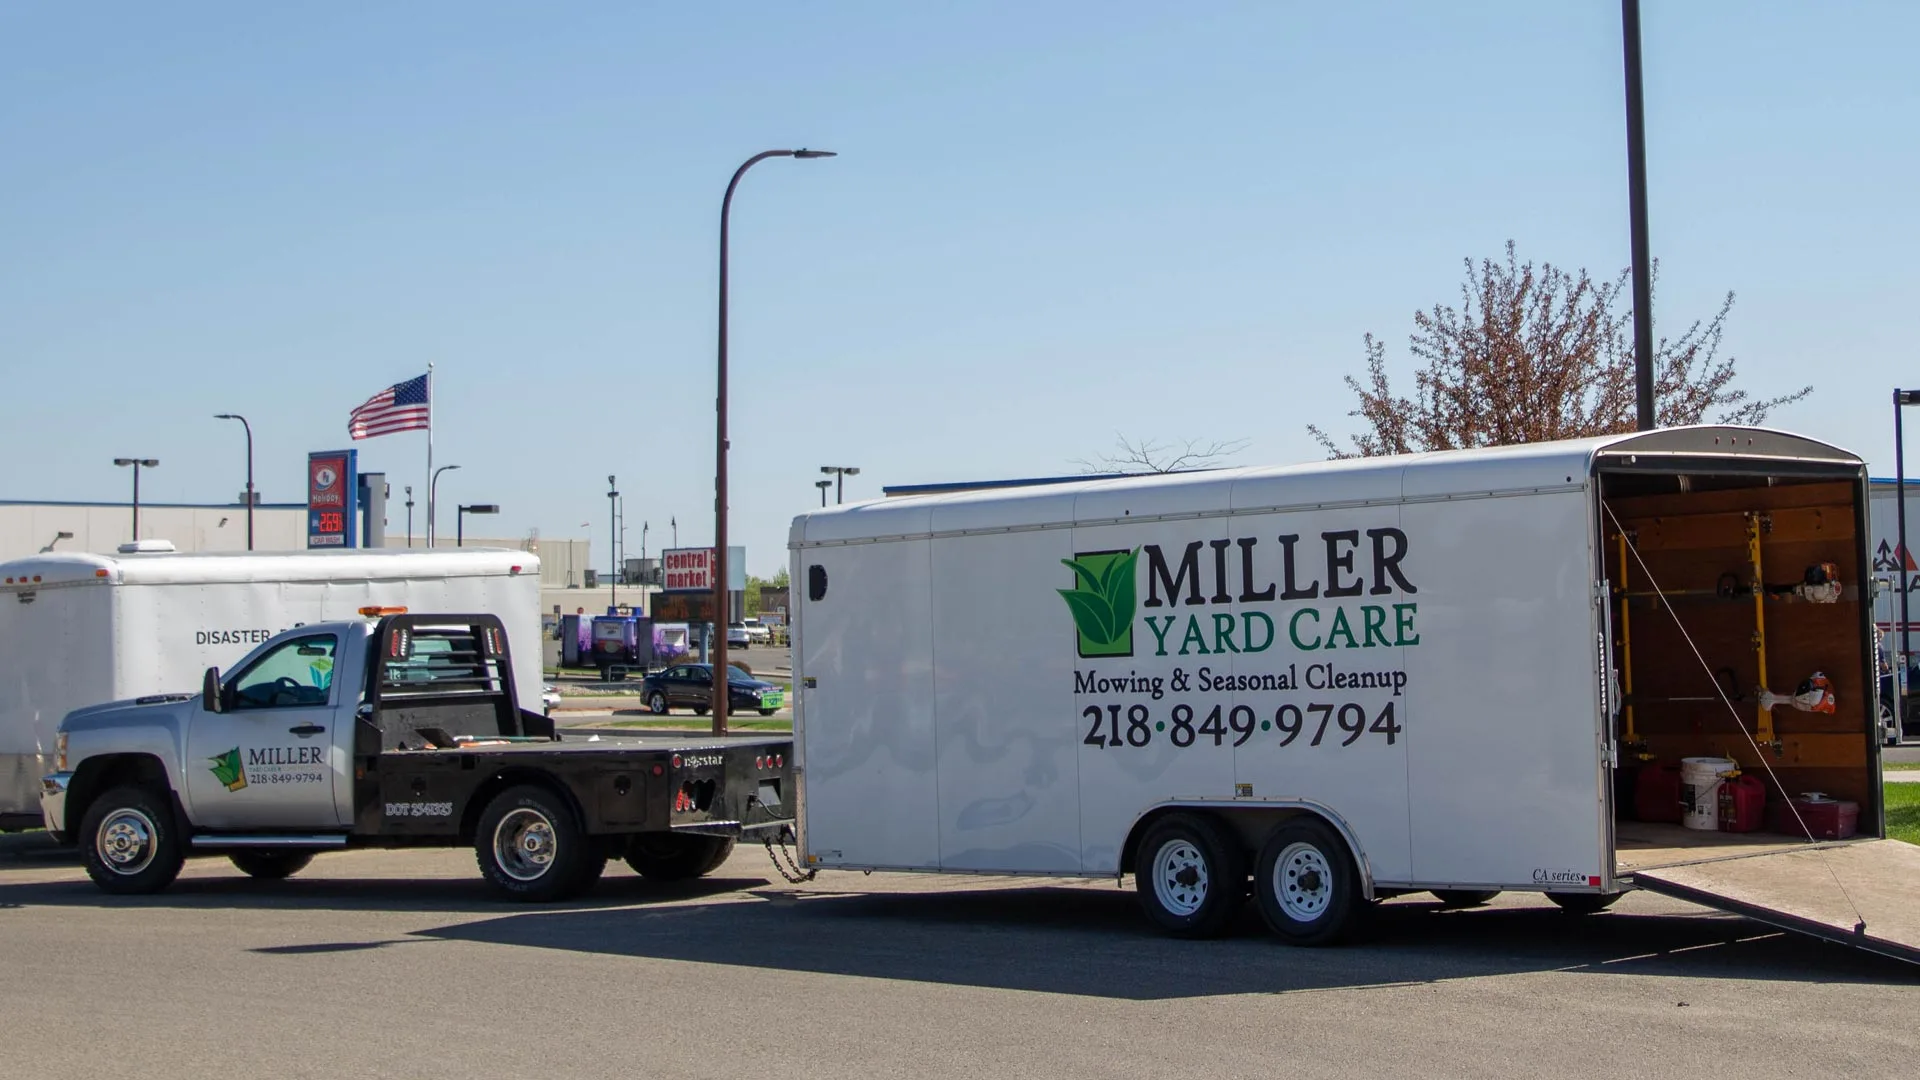 Our teams truck and trailer full of all our lawn equipment to service our clients in and around Detroit Lakes. Minnesota